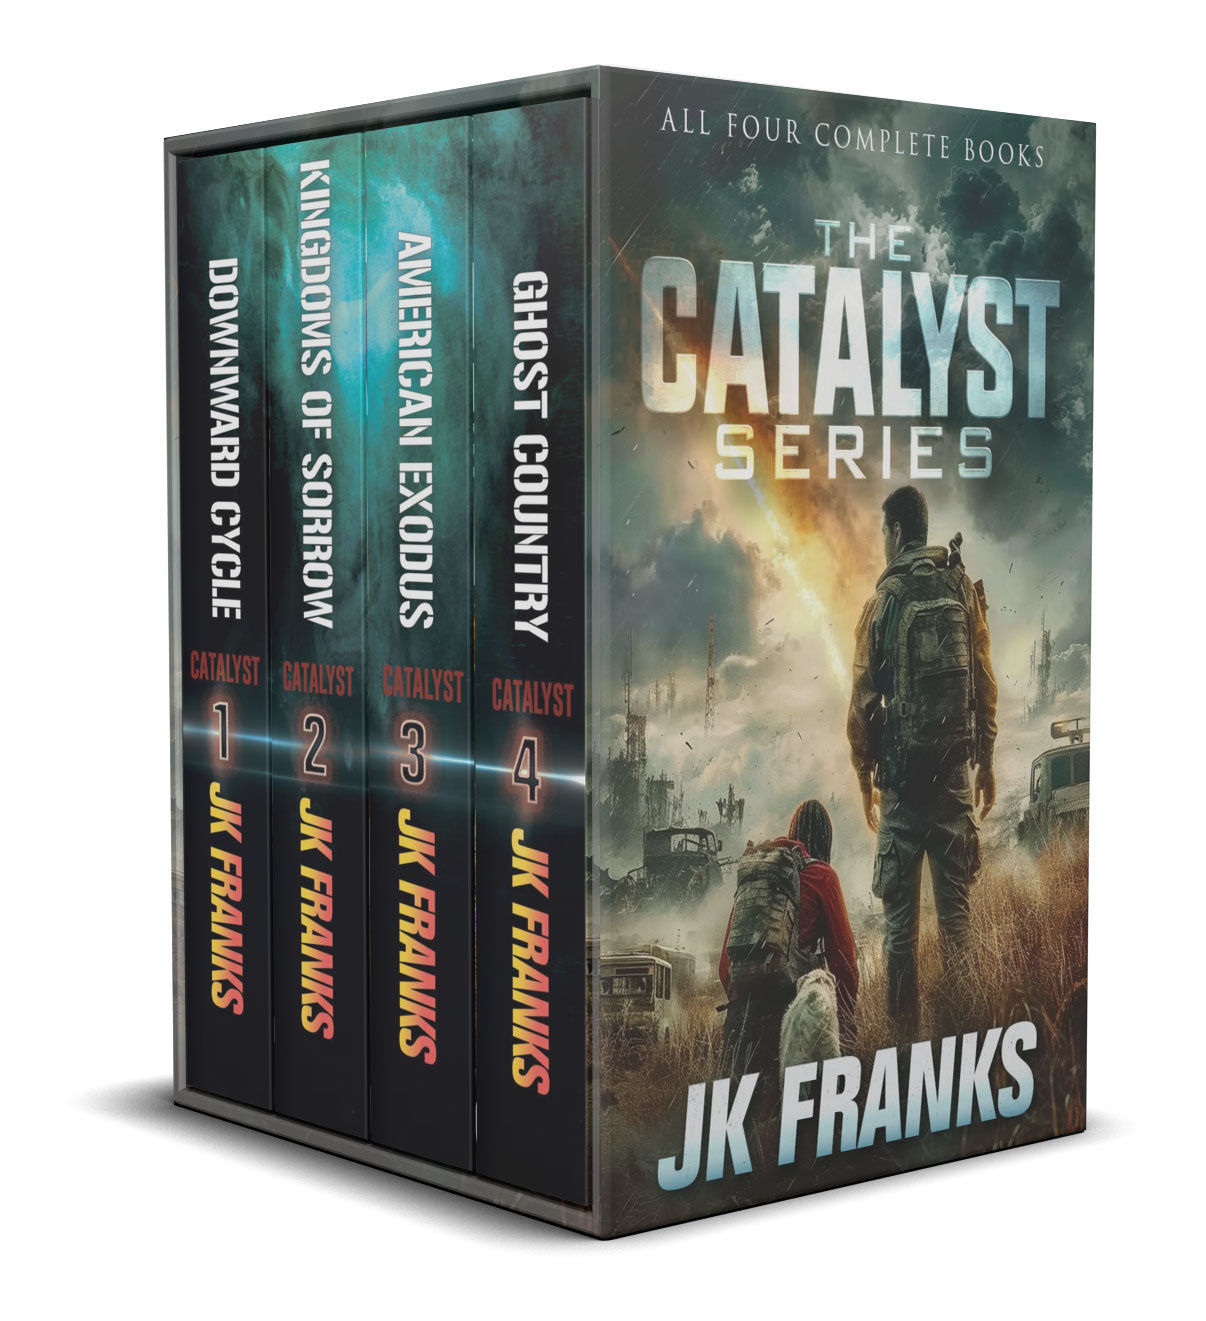 The Catalyst Series Paperback Set